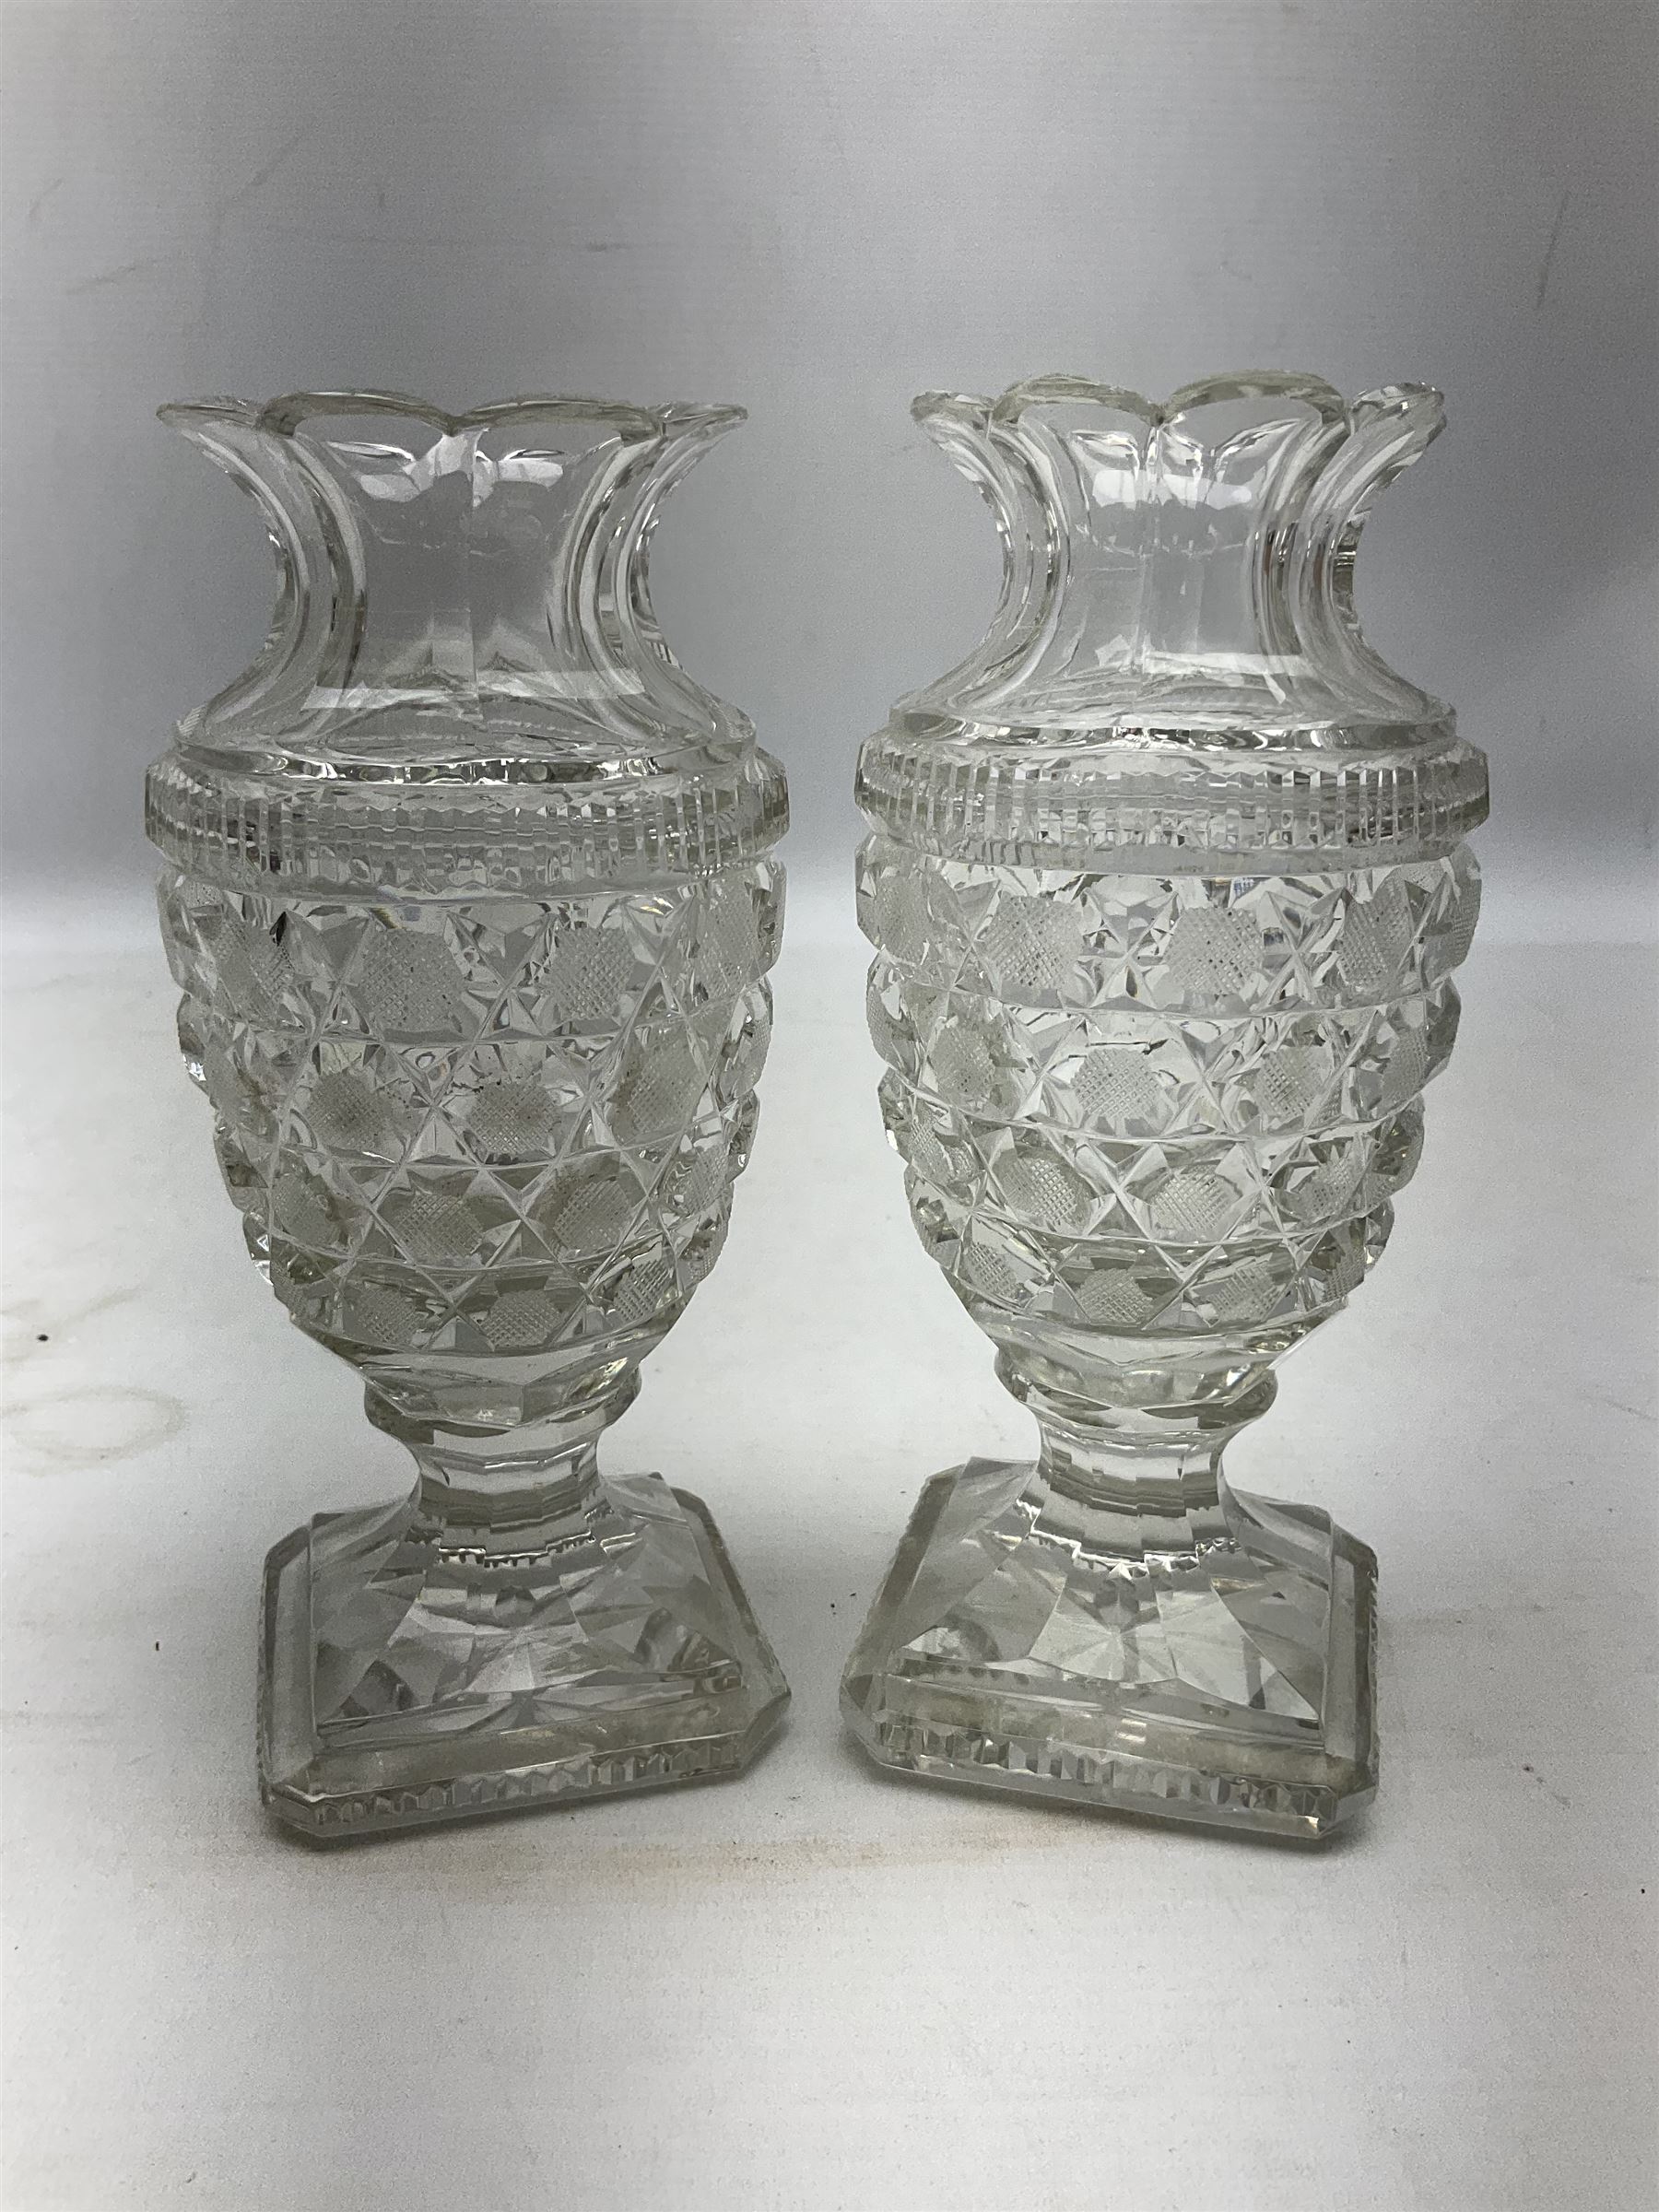 Pair of early 19th century heavy cut glass vases - Image 4 of 6